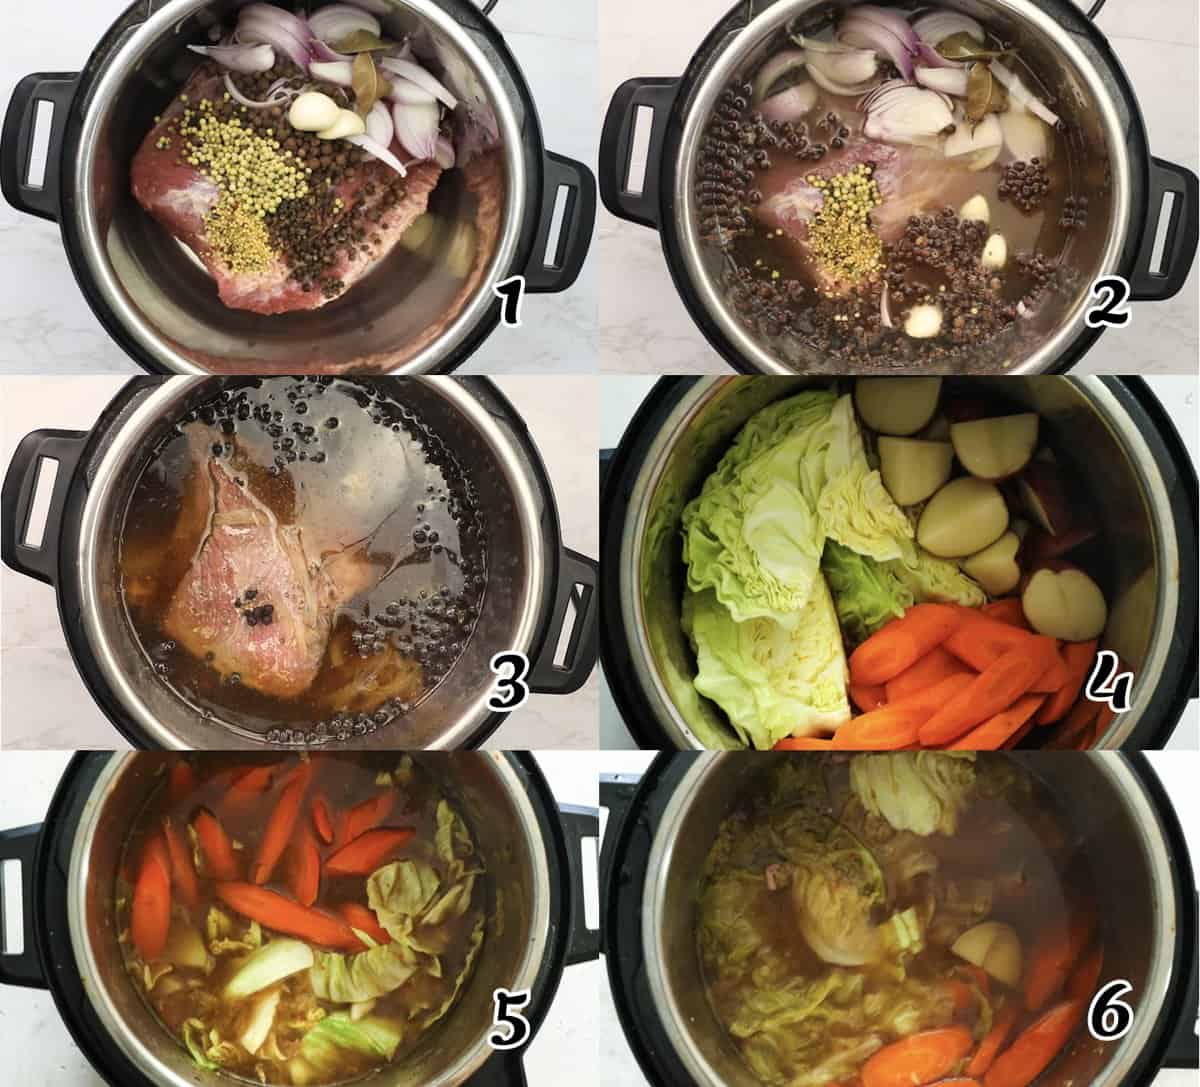 Pressure cook the meat before cooking the vegetables